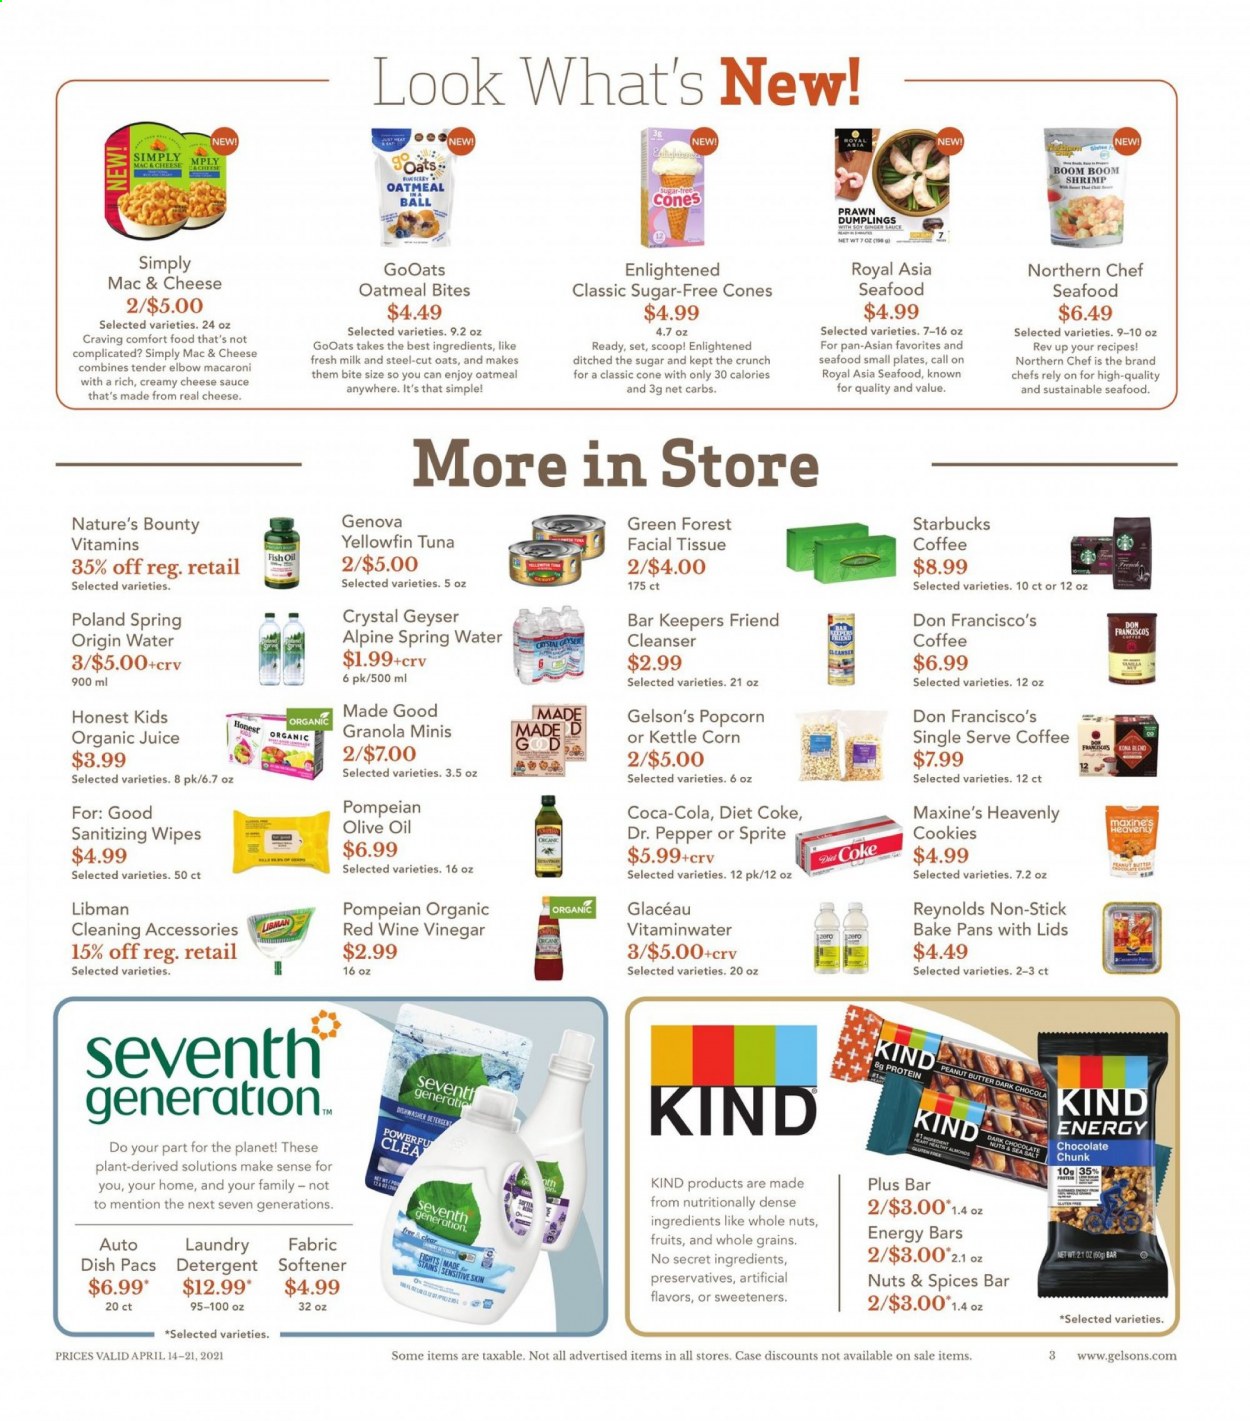 thumbnail - Gelson's Flyer - 04/14/2021 - 04/21/2021 - Sales products - tuna, prawns, shrimps, macaroni & cheese, macaroni, dumplings, milk, Enlightened lce Cream, cookies, chocolate, kettle corn, popcorn, oatmeal, granola, energy bar, pepper, vinegar, wine vinegar, olive oil, oil, peanut butter, Coca-Cola, Sprite, juice, Dr. Pepper, Diet Coke, spring water, coffee, Starbucks, wipes, tissues, detergent, antiseptic wipes, fabric softener, Voom, cleanser, plate, pan, Nature's Bounty. Page 3.